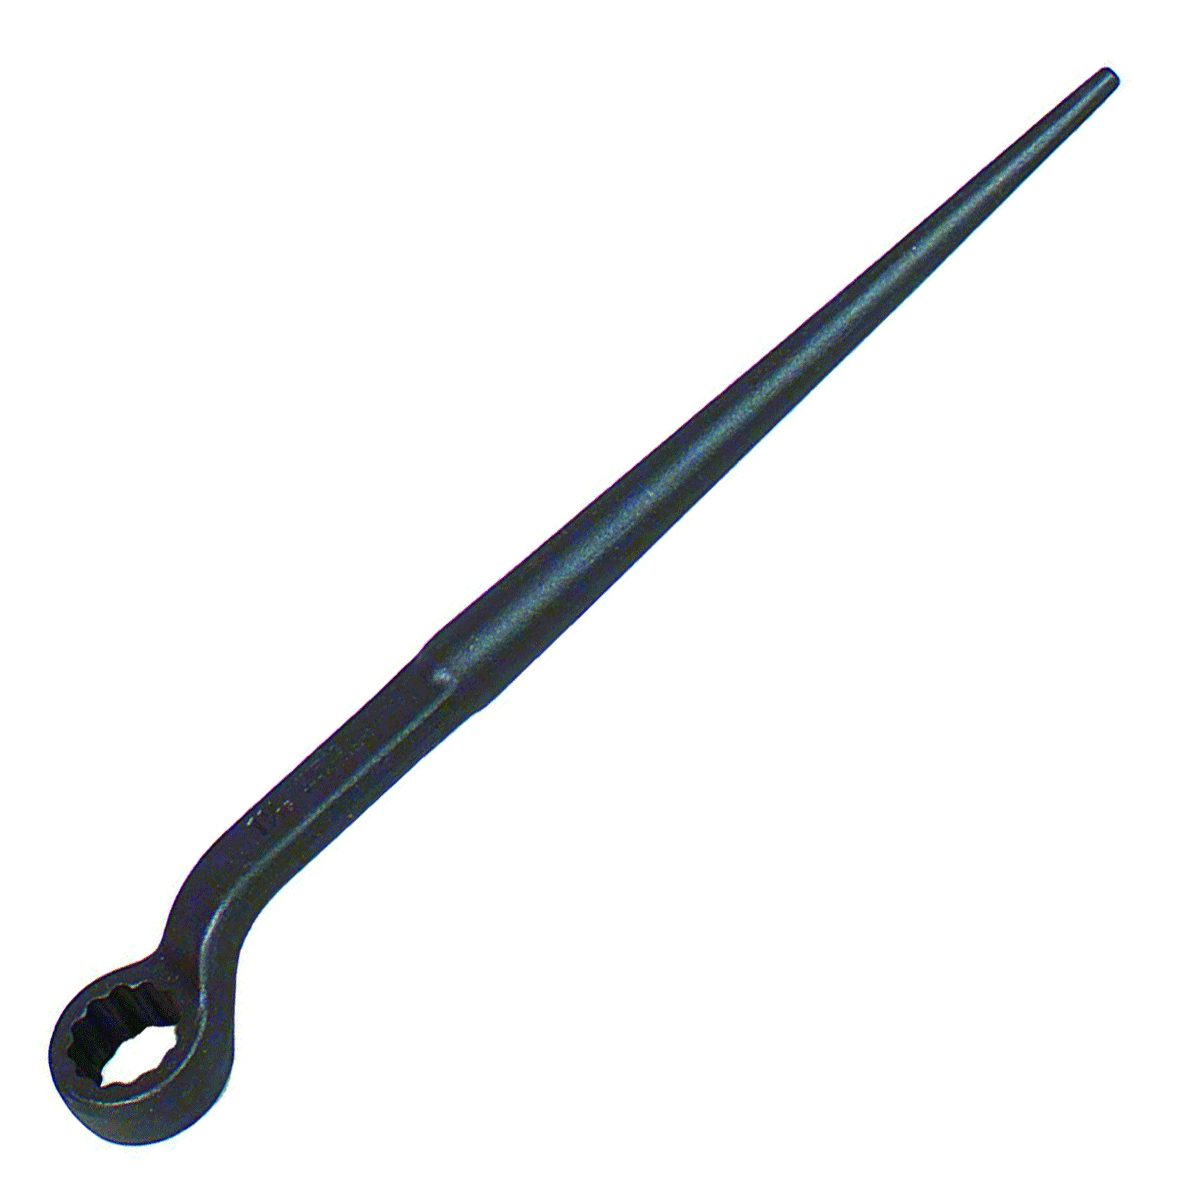 Wright 1-1/16" Spud Handle Box Wrench 12 Pt. #1764 (1764WR)